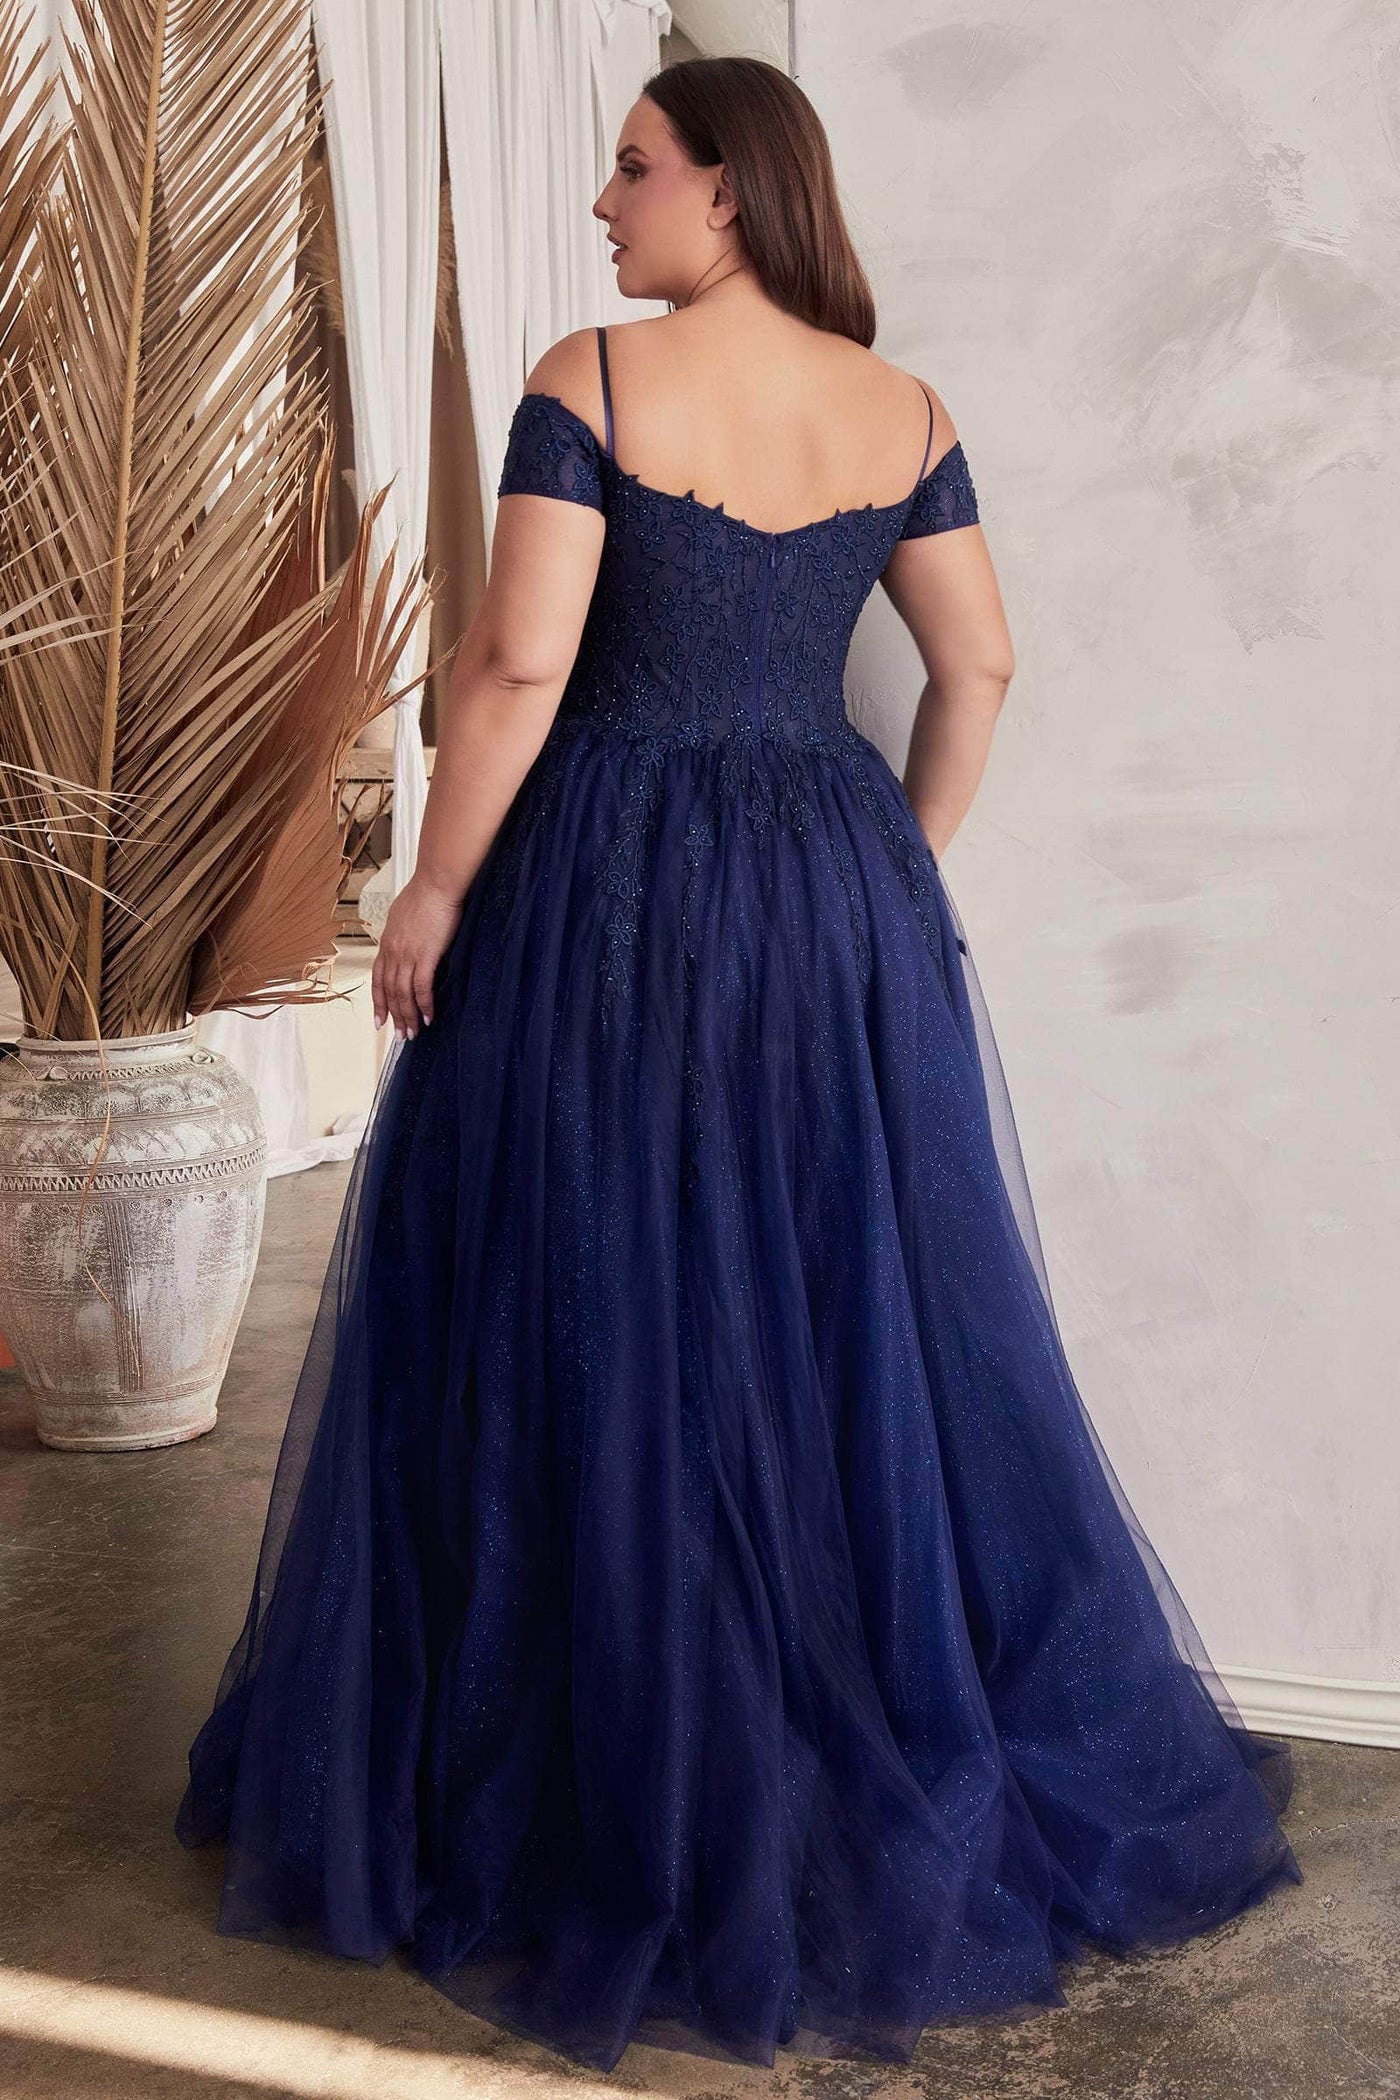 Ladivine C154C - Embroidered Cold Shoulder Gown Special Occasion Dress